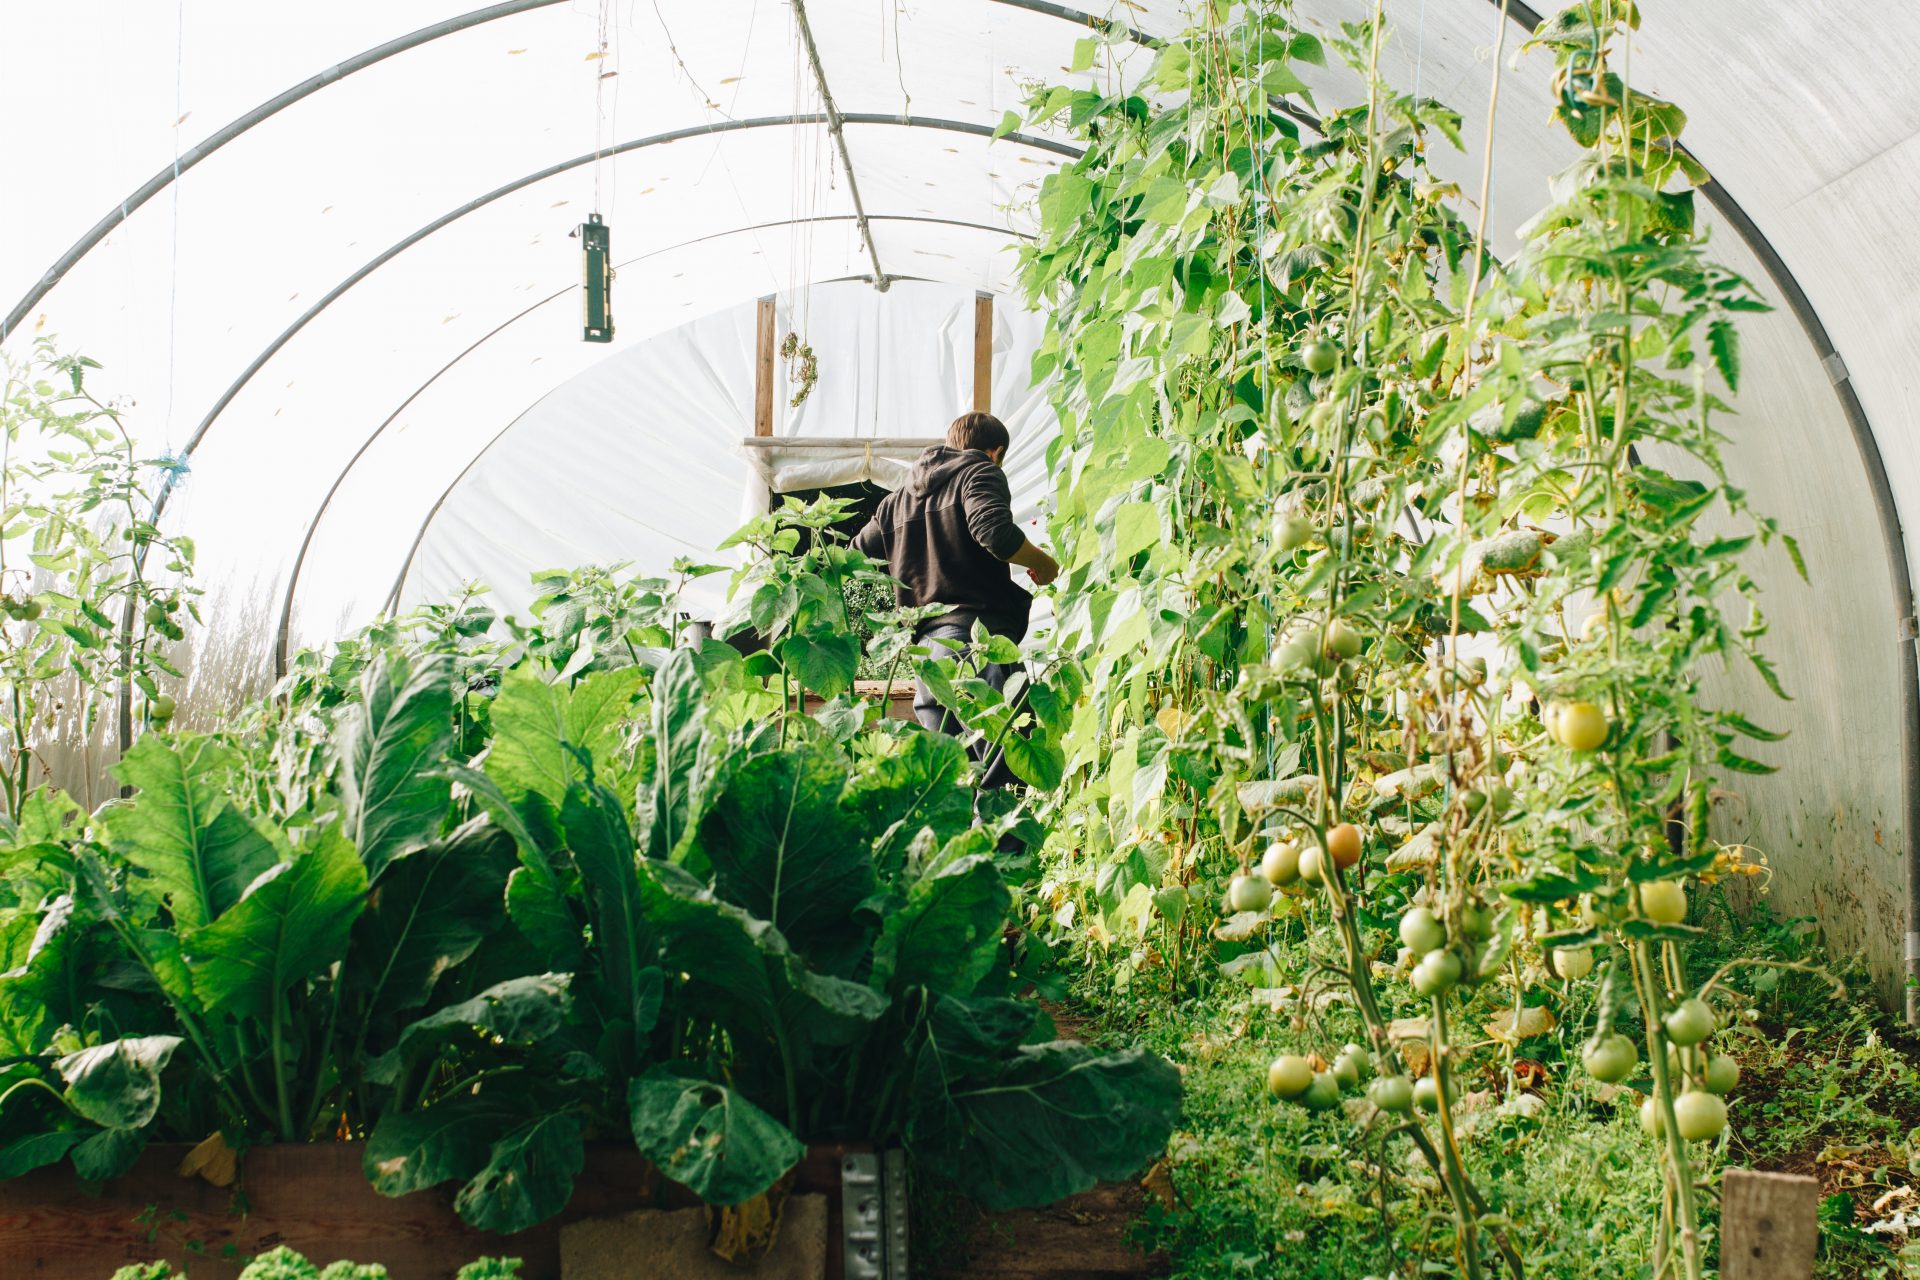 A man stands with his back to the camera in a greenhouse full of green vegetable plants and looks down at the ground.